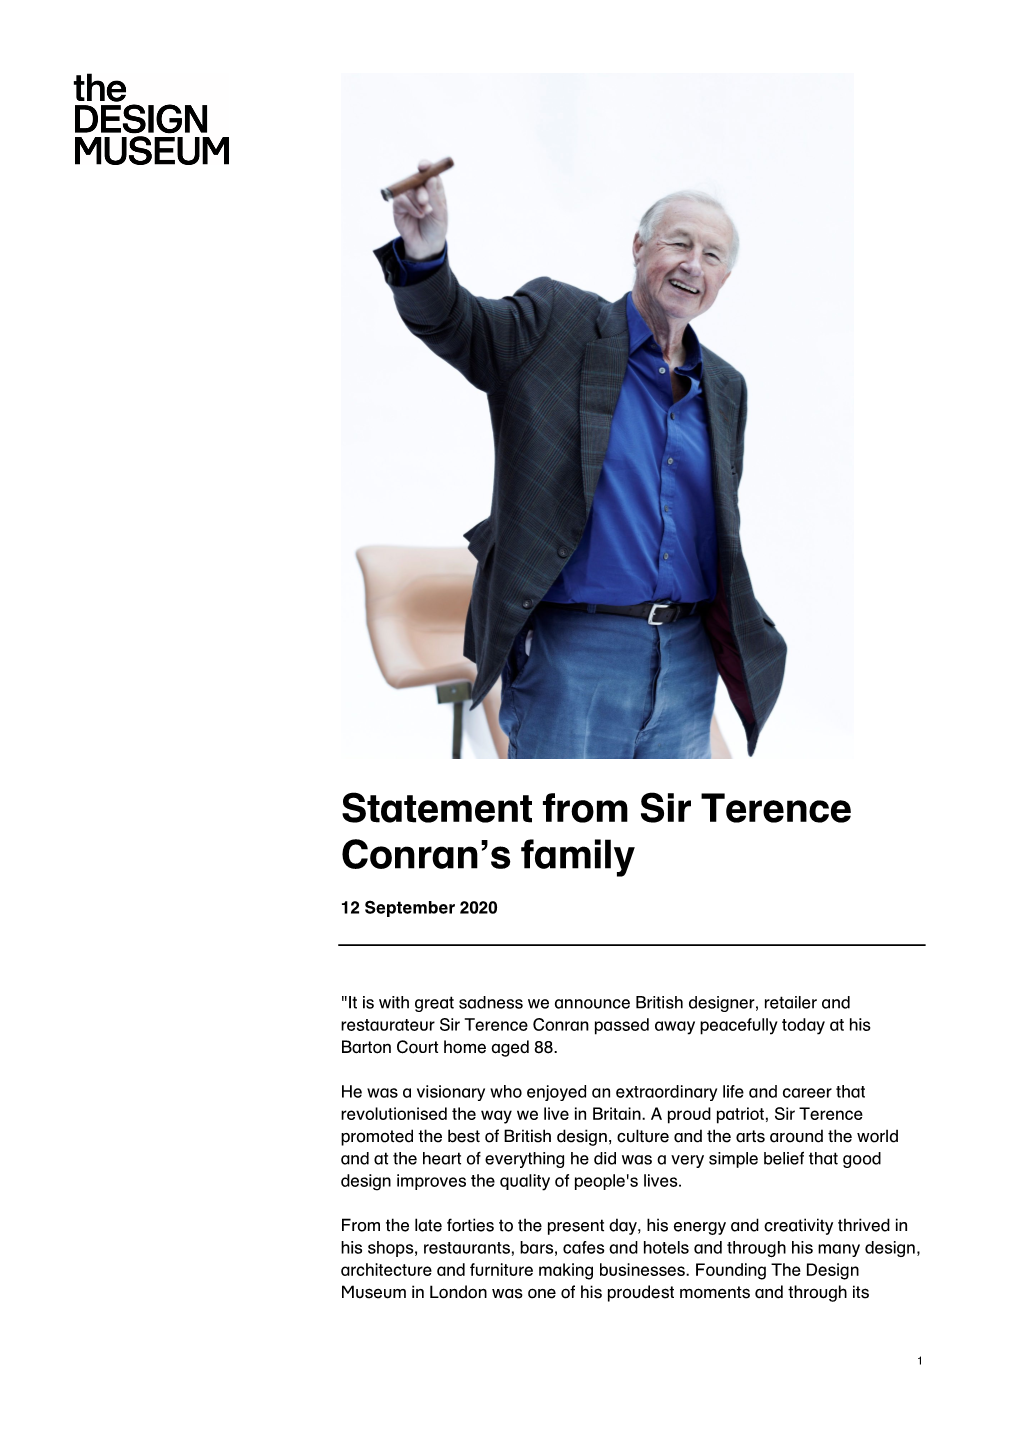 Statement from Sir Terence Conran's Family